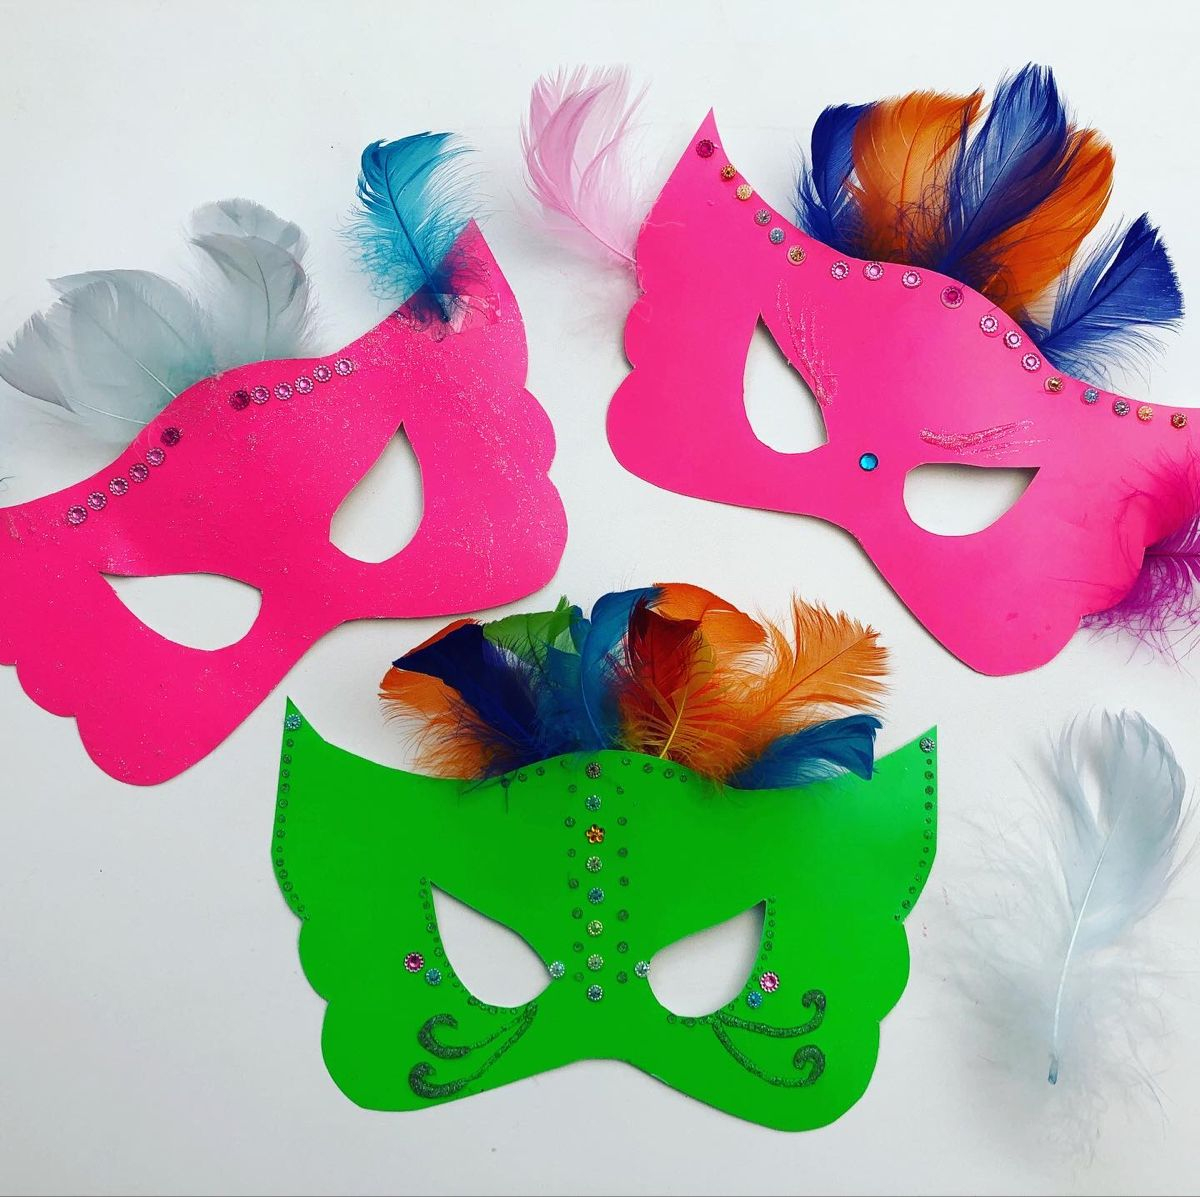 Brazilian Carnival Masks Kids Crafts In 2020  Arts And Crafts For Kids à Masque Carnaval Rio